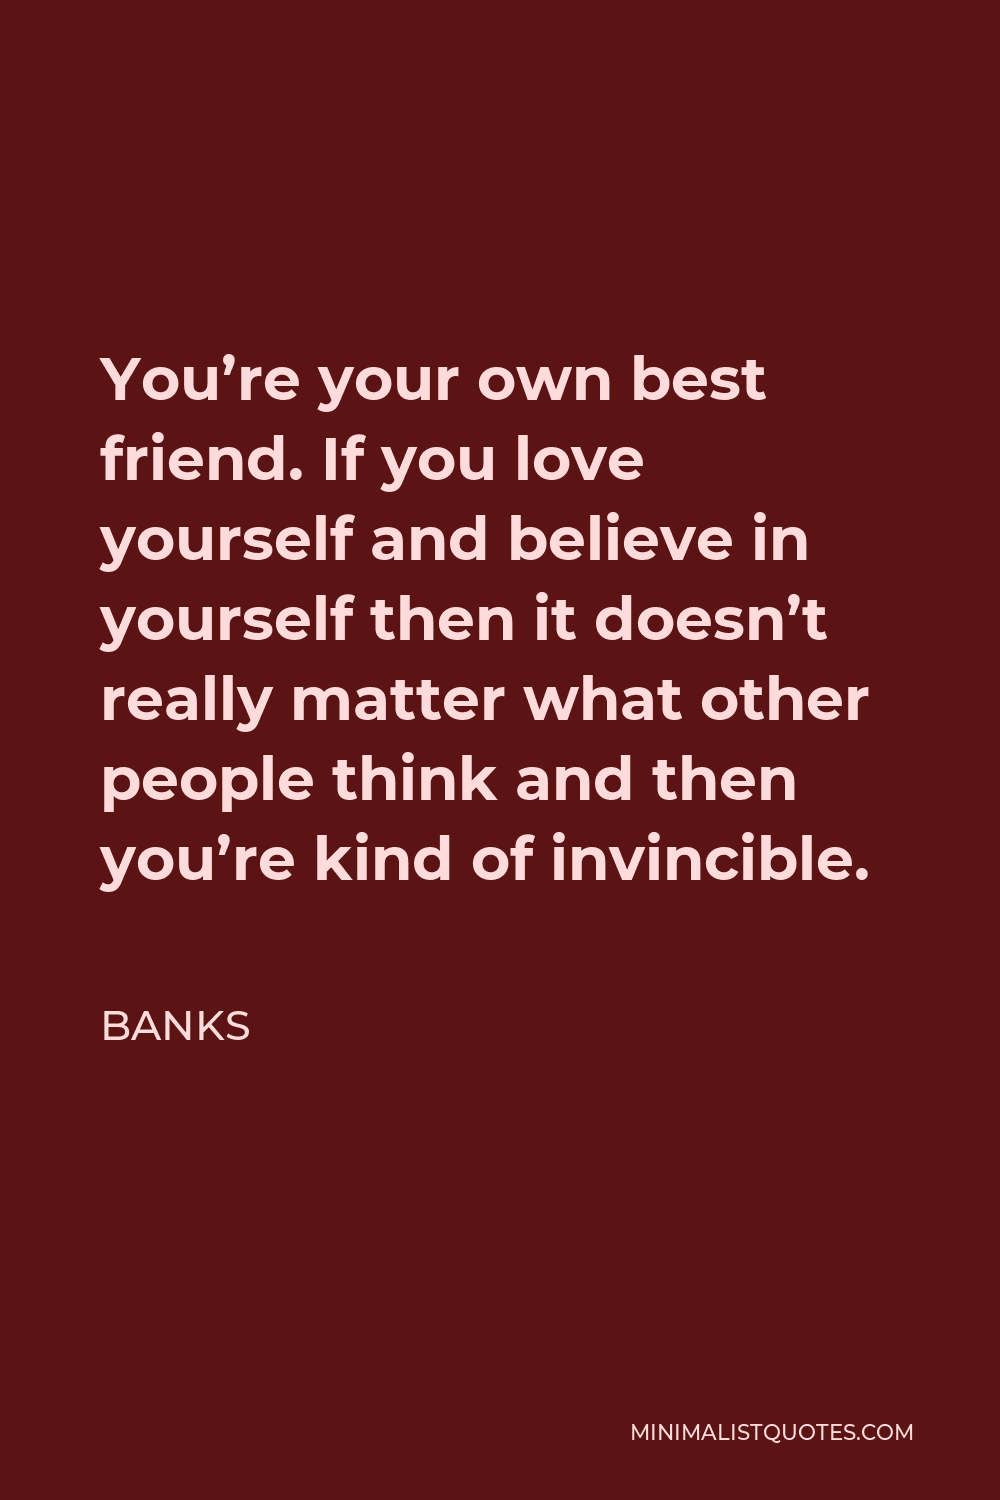 BANKS Quote - You’re your own best friend. If you love yourself and believe in yourself then it doesn’t really matter what other people think and then you’re kind of invincible.